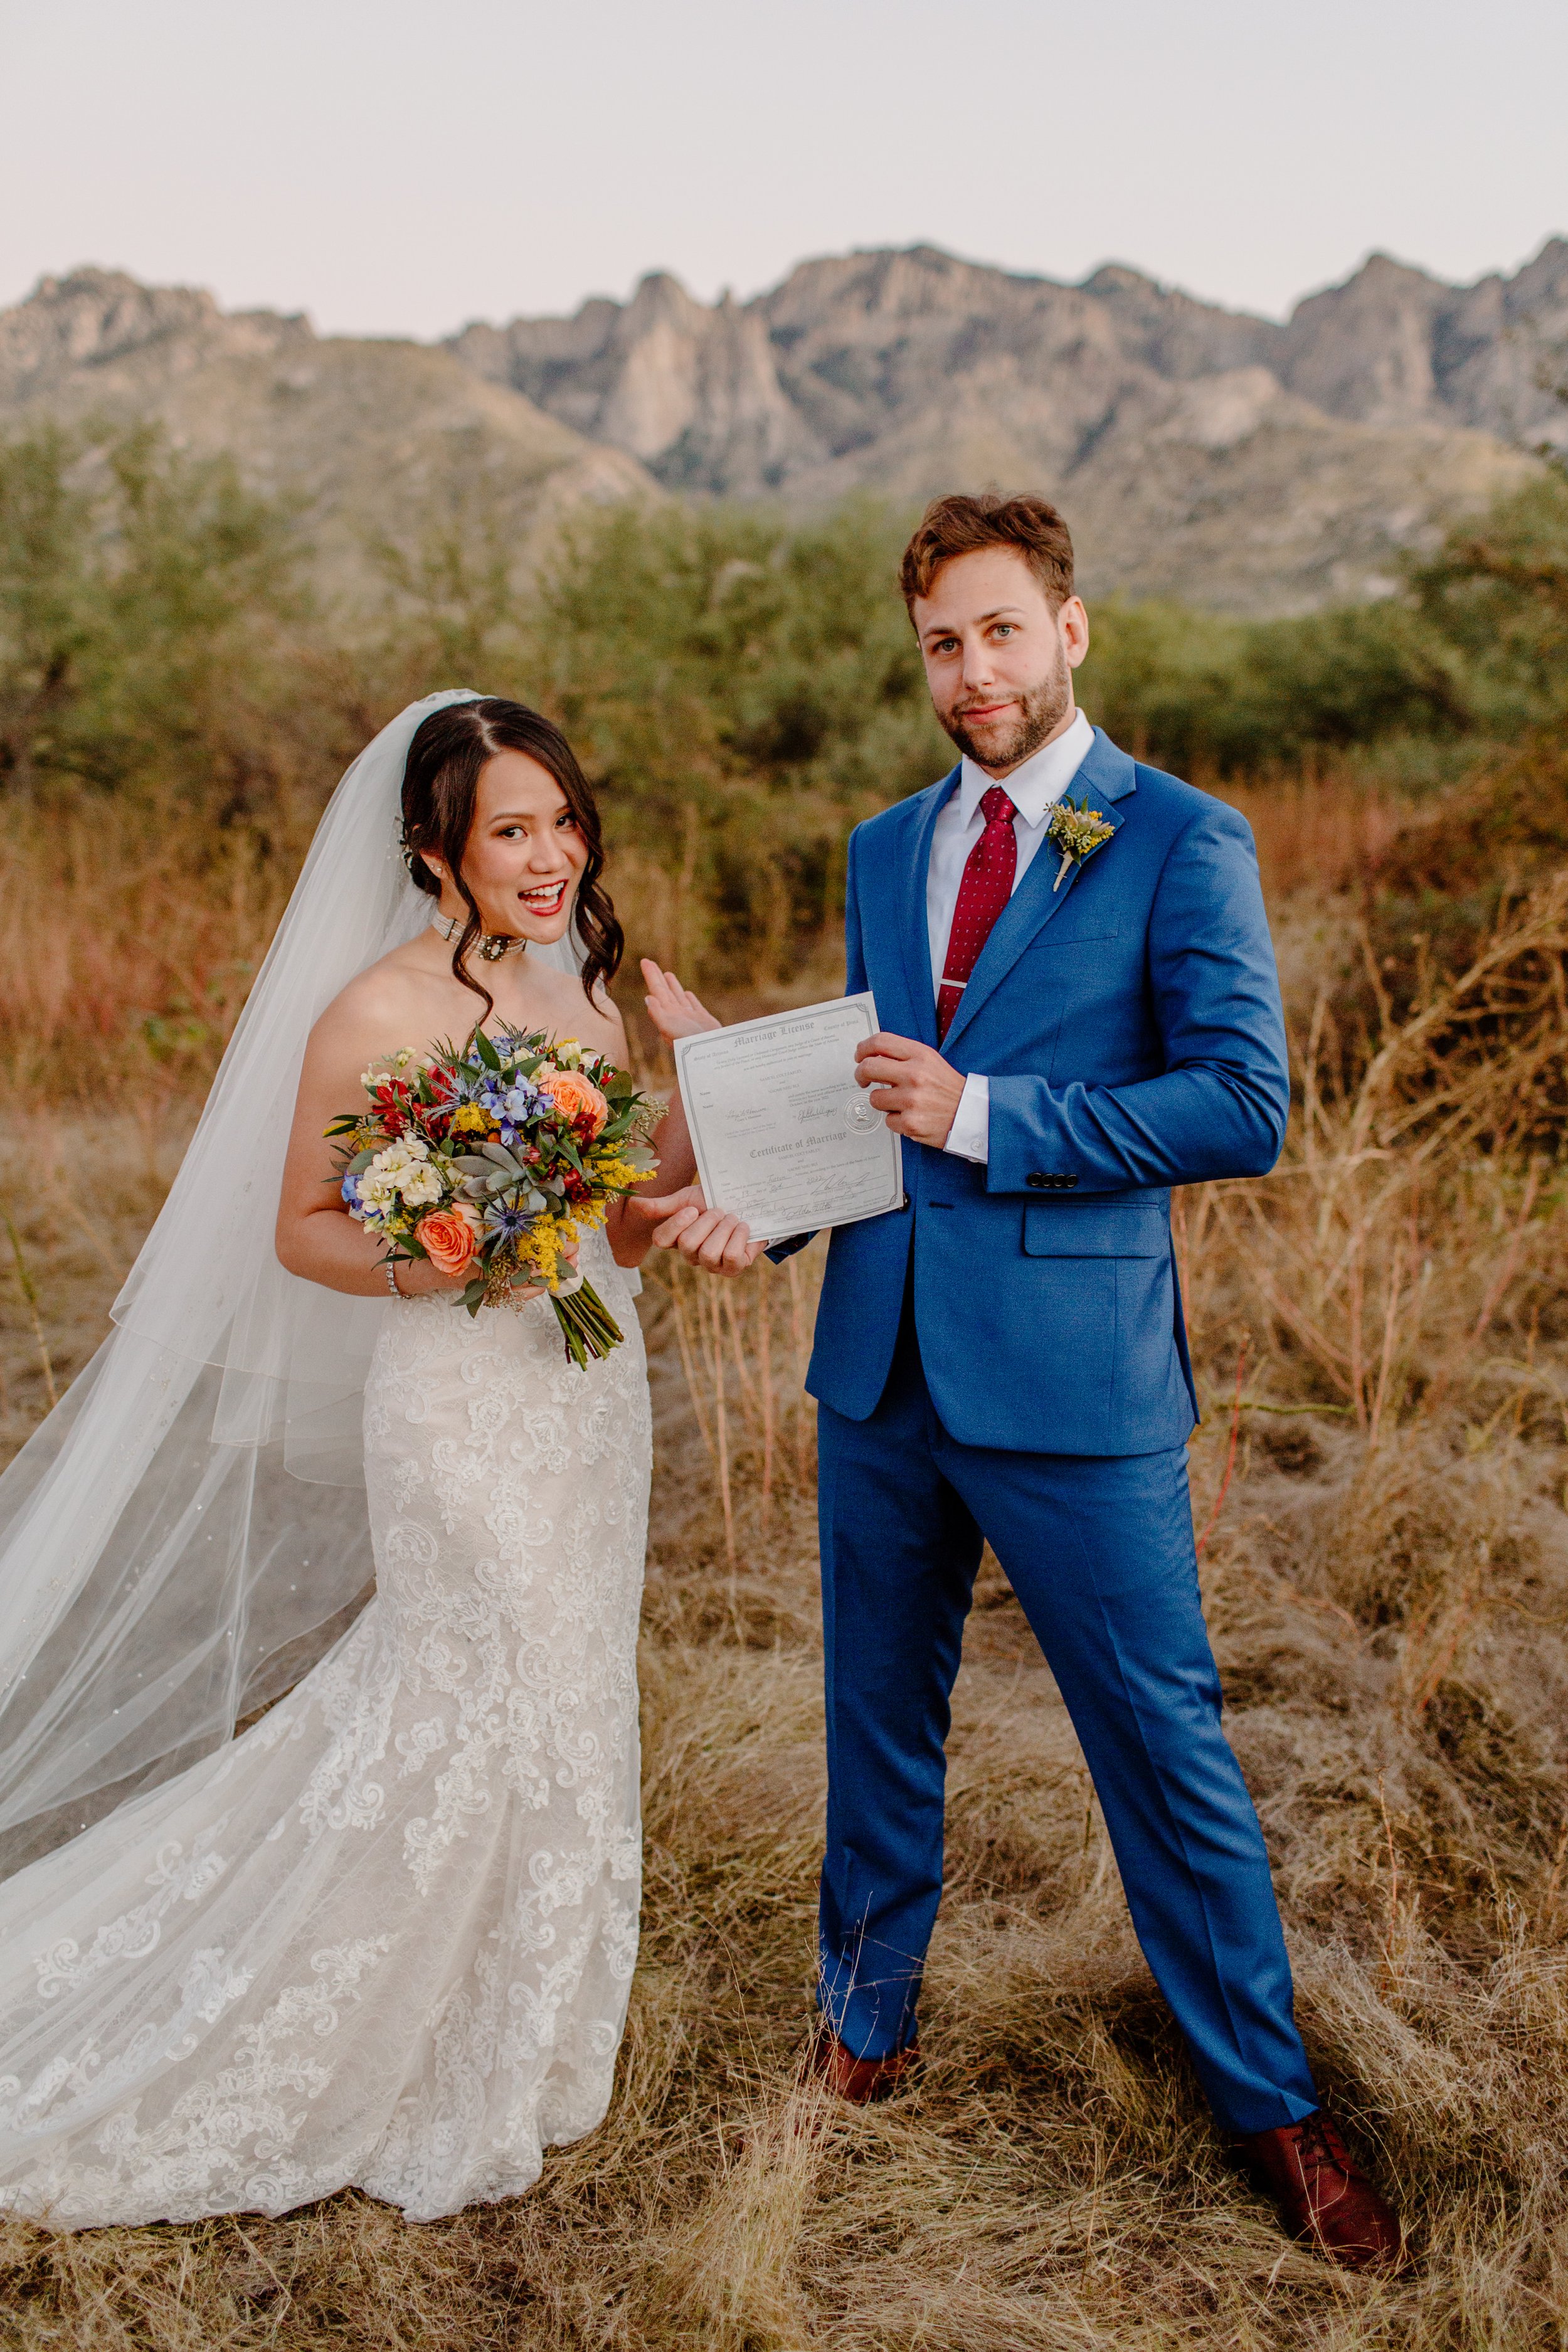  newly married couple show off marriage license after intimate desert ceremony for rock climbing session 